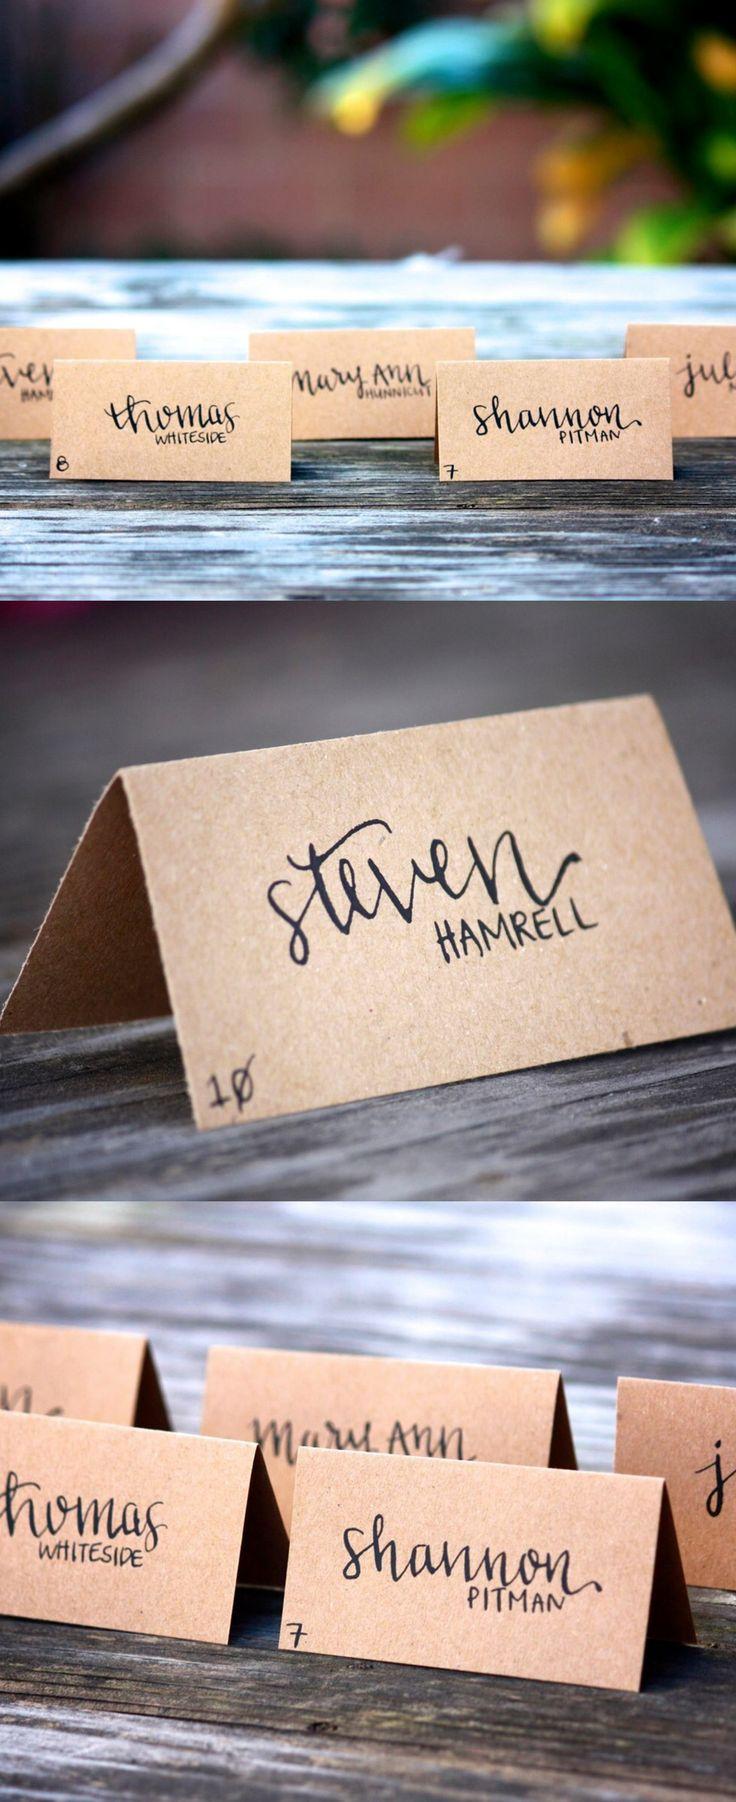 Hochzeit - Wedding Place Cards - Tent Fold - Escort Card - Black Calligraphy With Kraft Paper - Dinner Party - Name Tag